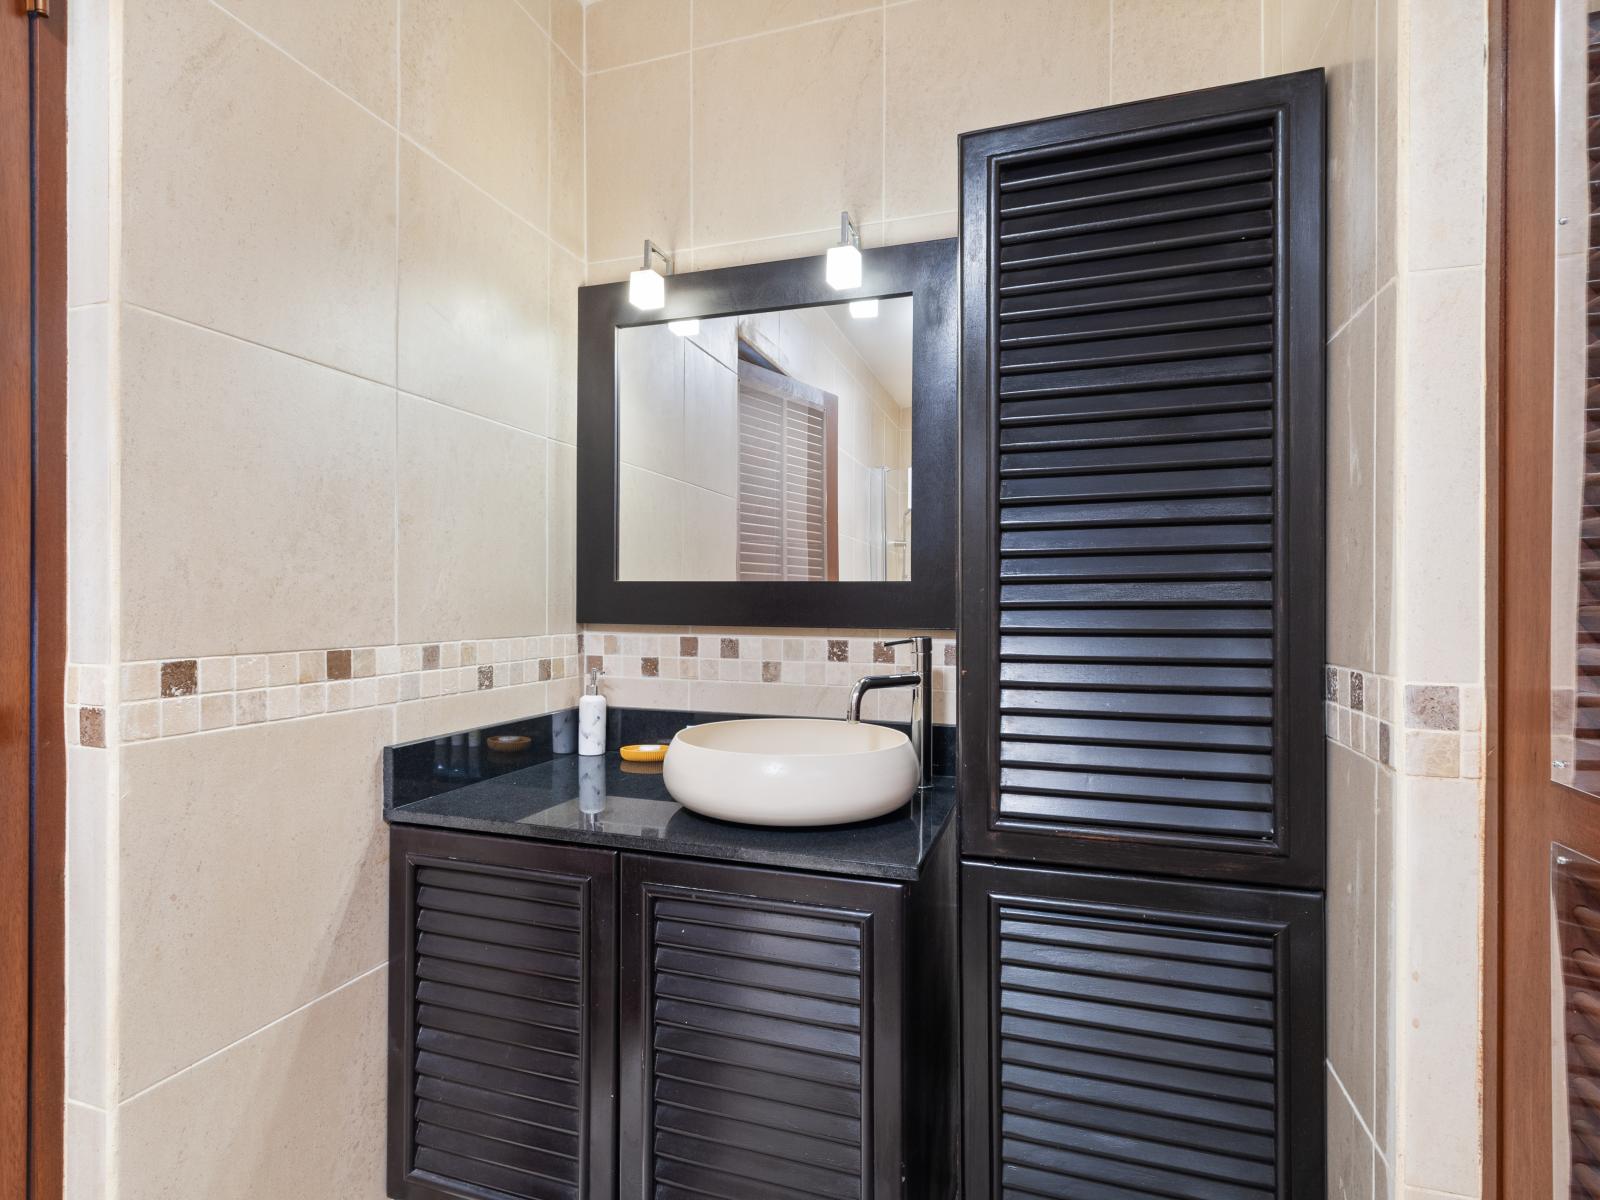 Unwind in the third bedroom's bathroom, where a luxurious bathing experience awaits you.